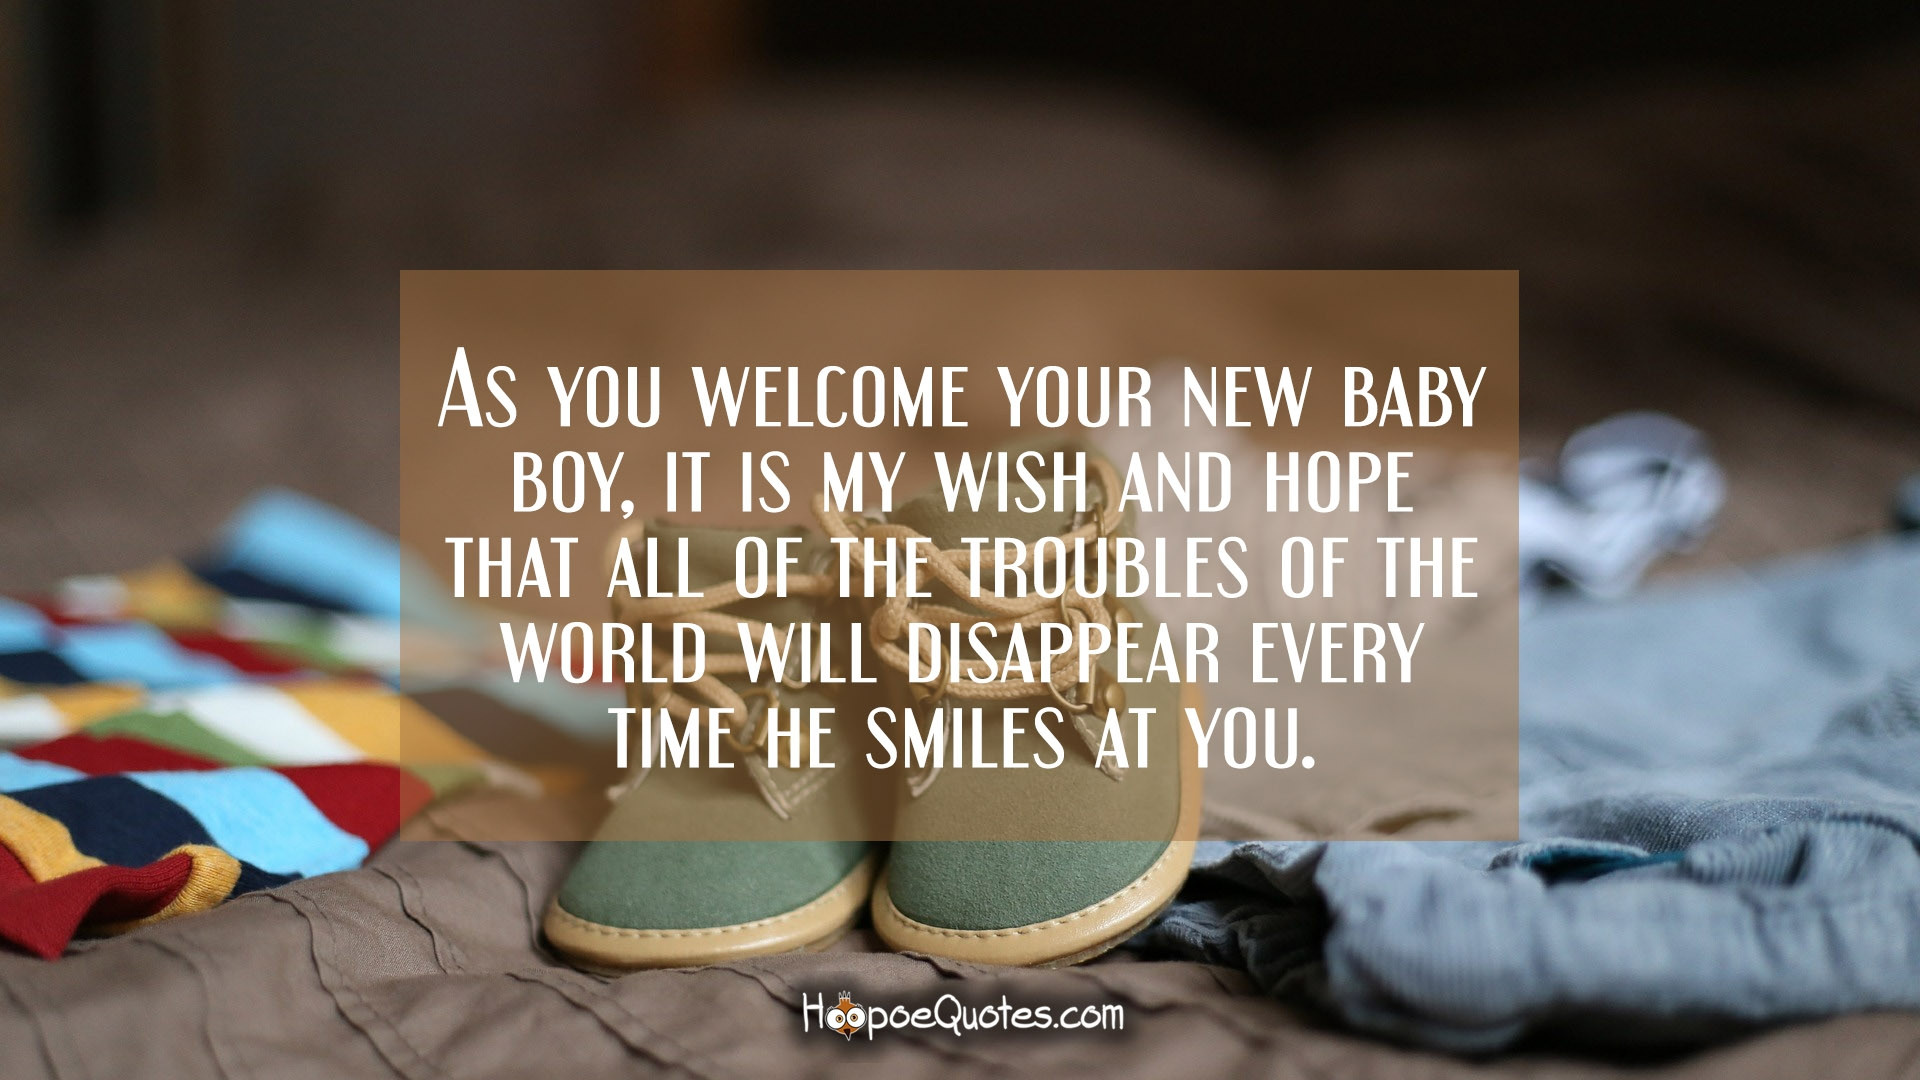 Welcome New Baby Boy Quotes
 As you wel e your new baby boy it is my wish and hope